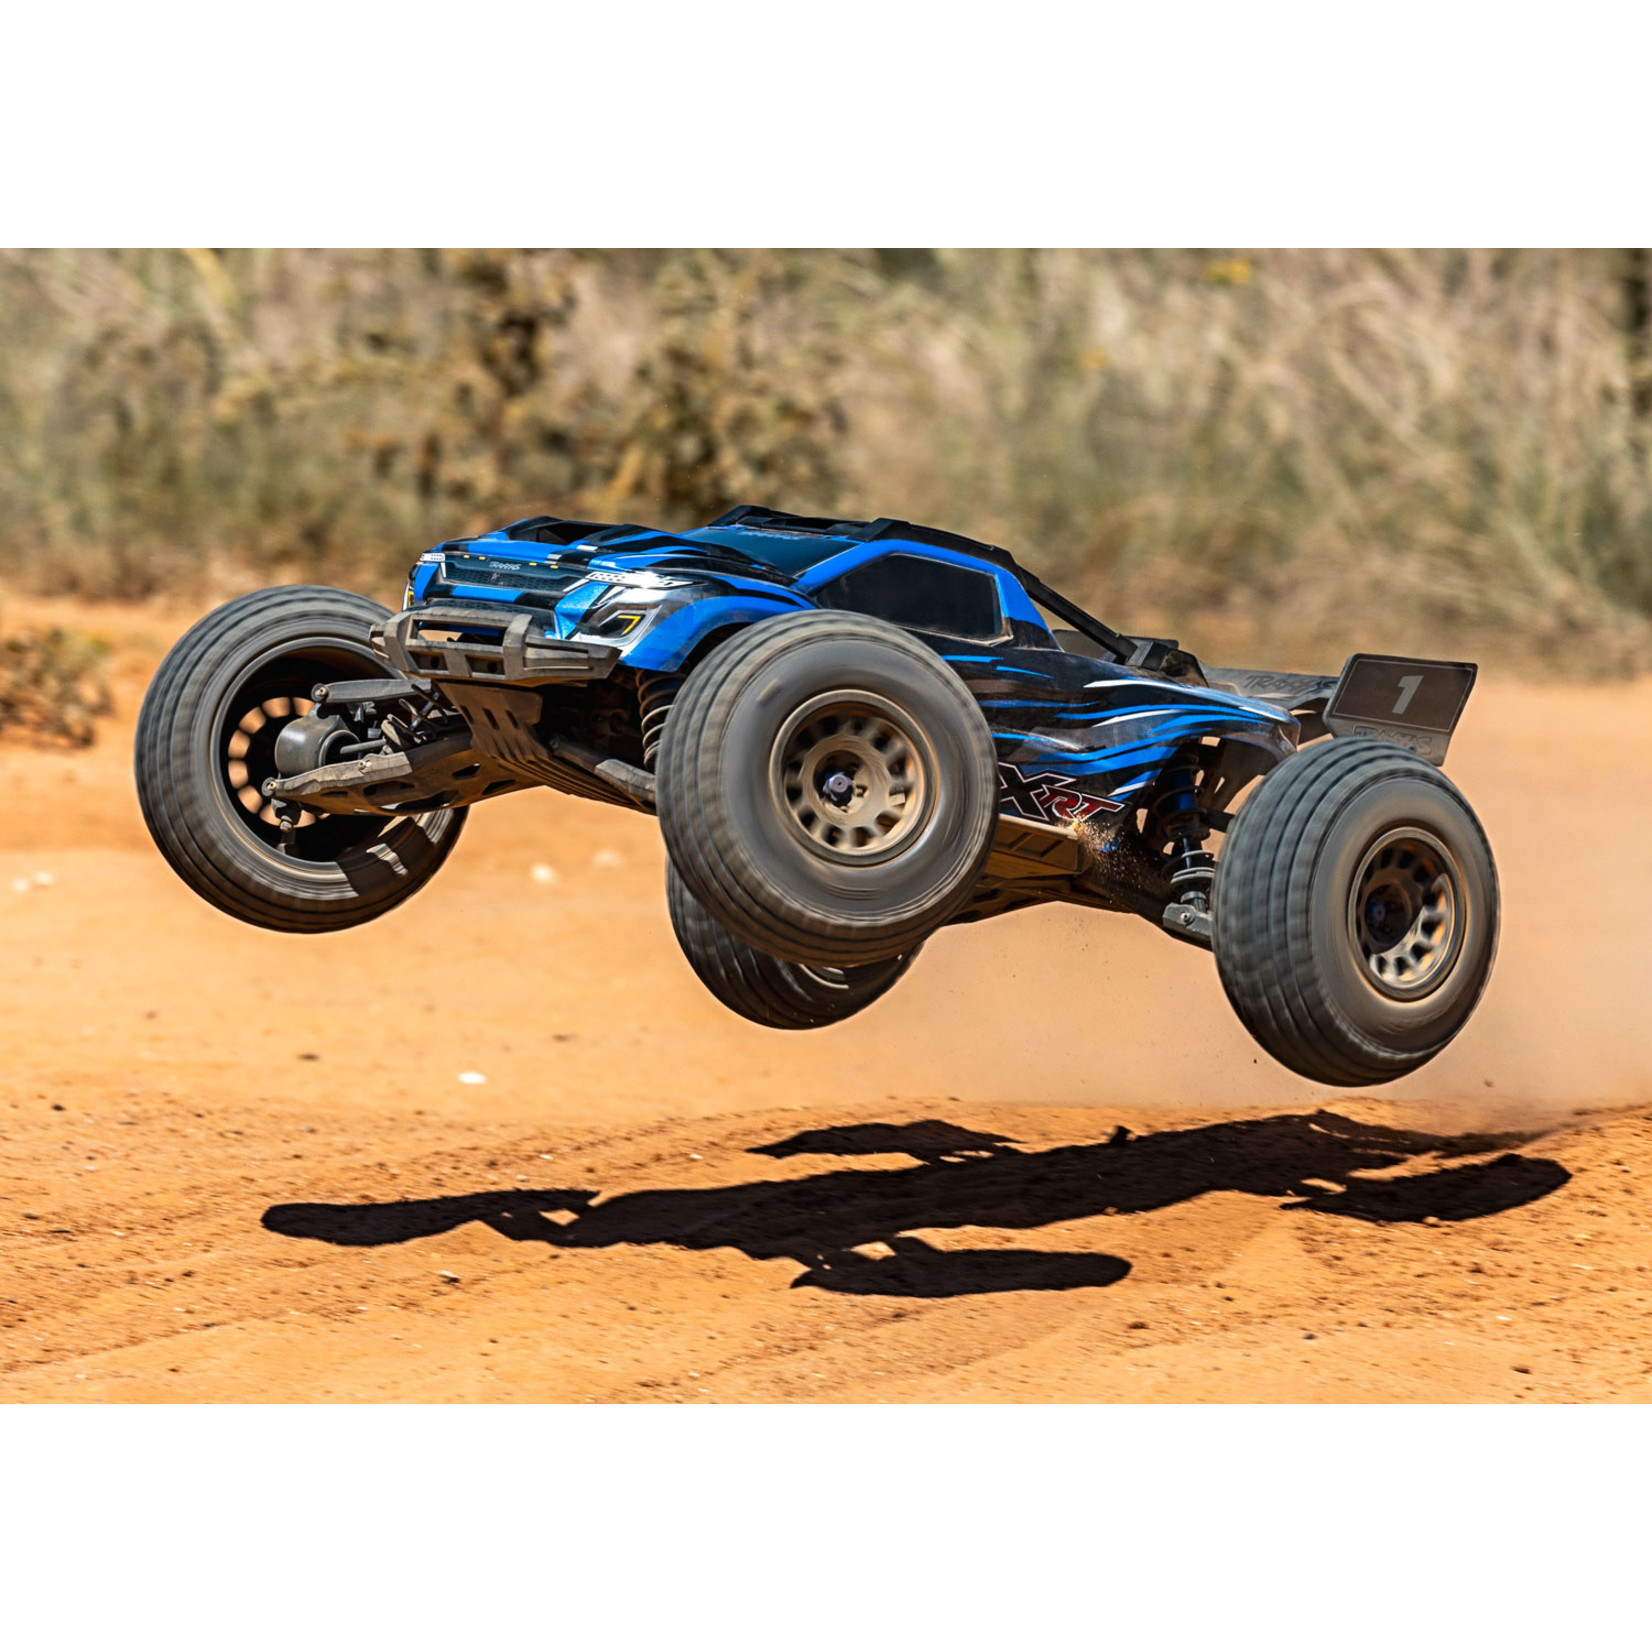 Traxxas XRT: Brushless Electric Race Truck with Traxxas Link, Velineon VXL-8s Brushless ESC, and Traxxas Stability Management (TSM)